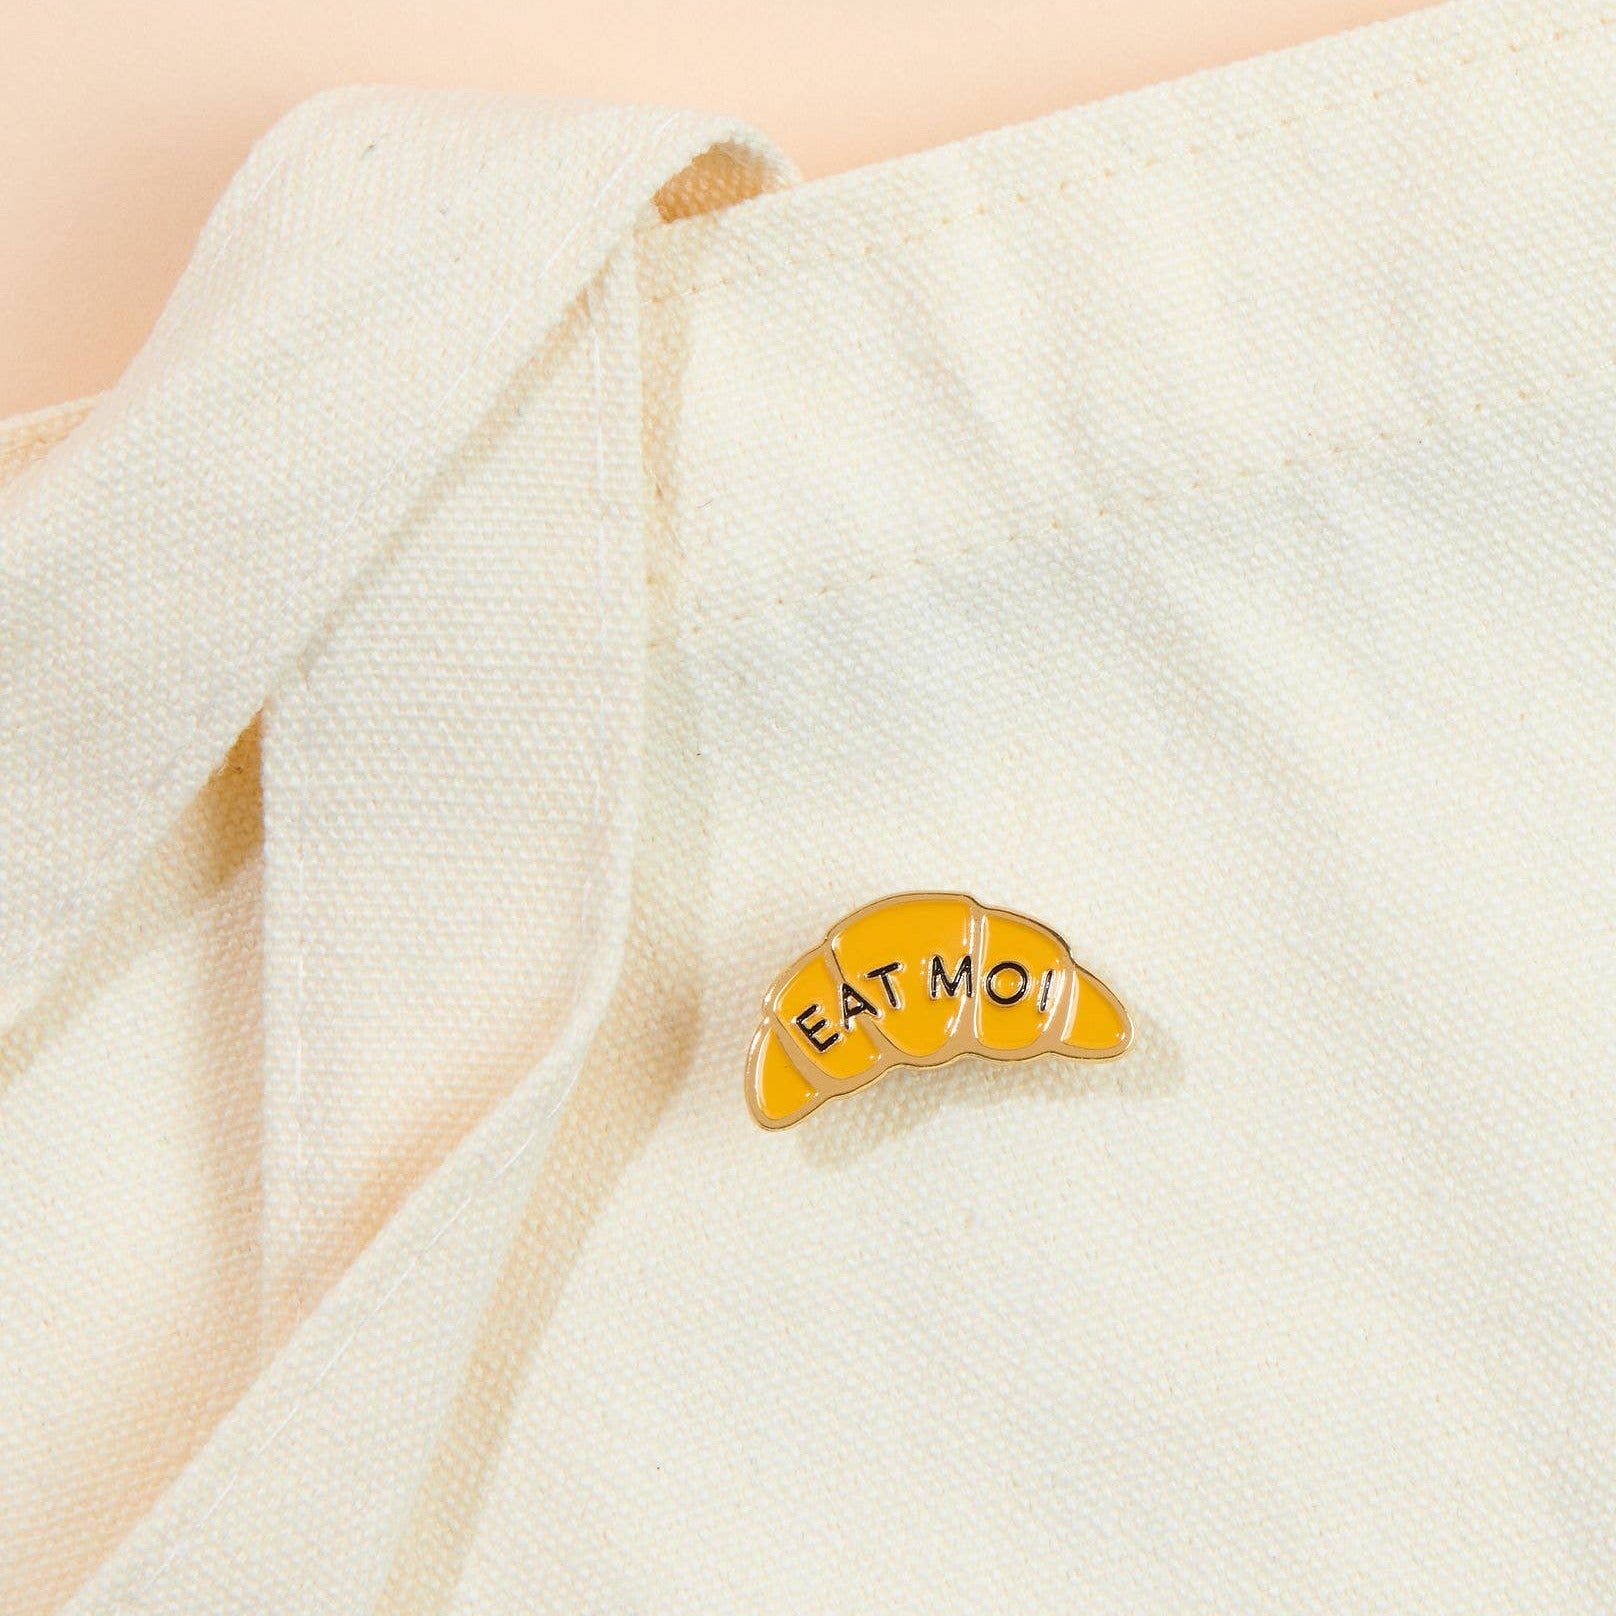 Enamel pin in the shape of a croissant that says "EAT MOI". Staged on a beige tote bag.